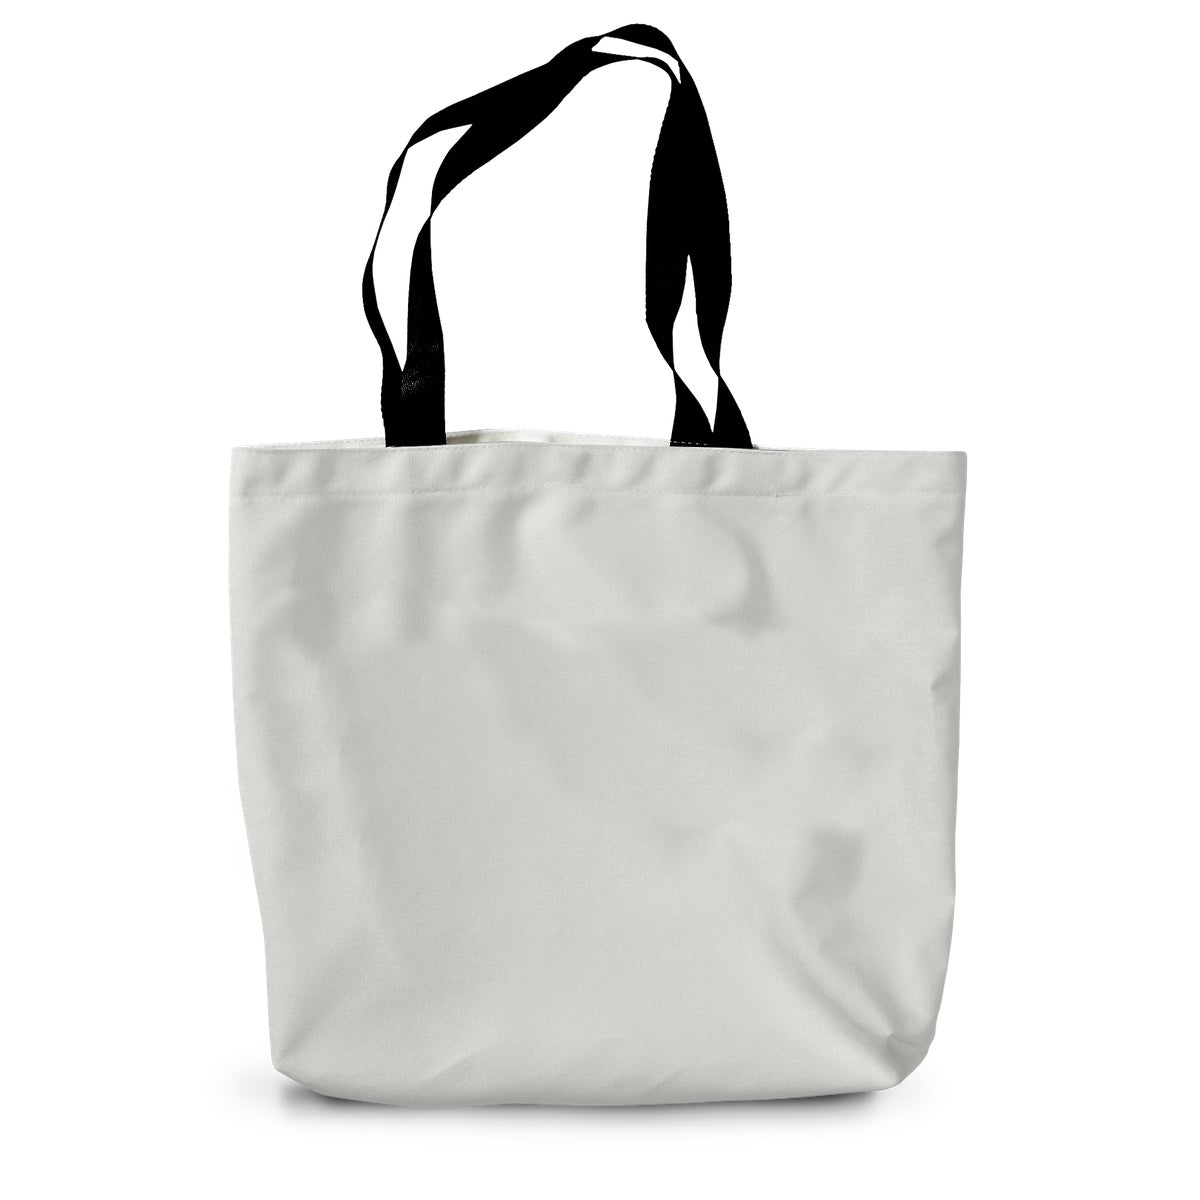 Surprise View - Into the sunset Canvas Tote Bag